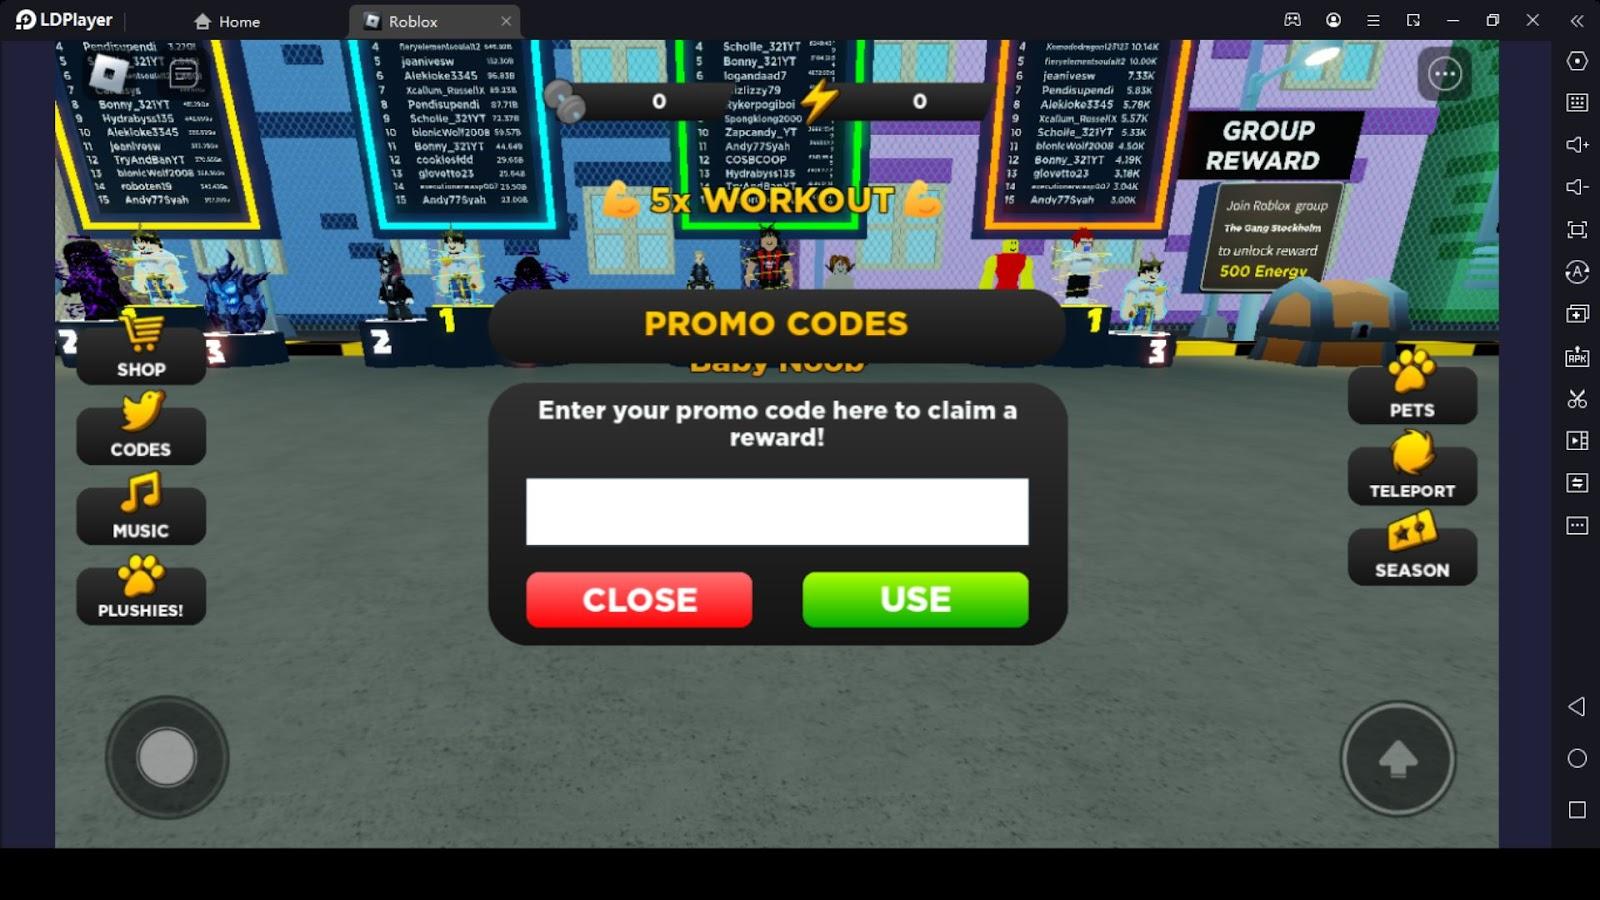 All Roblox Strongman Simulator codes in December 2023: Free Energy